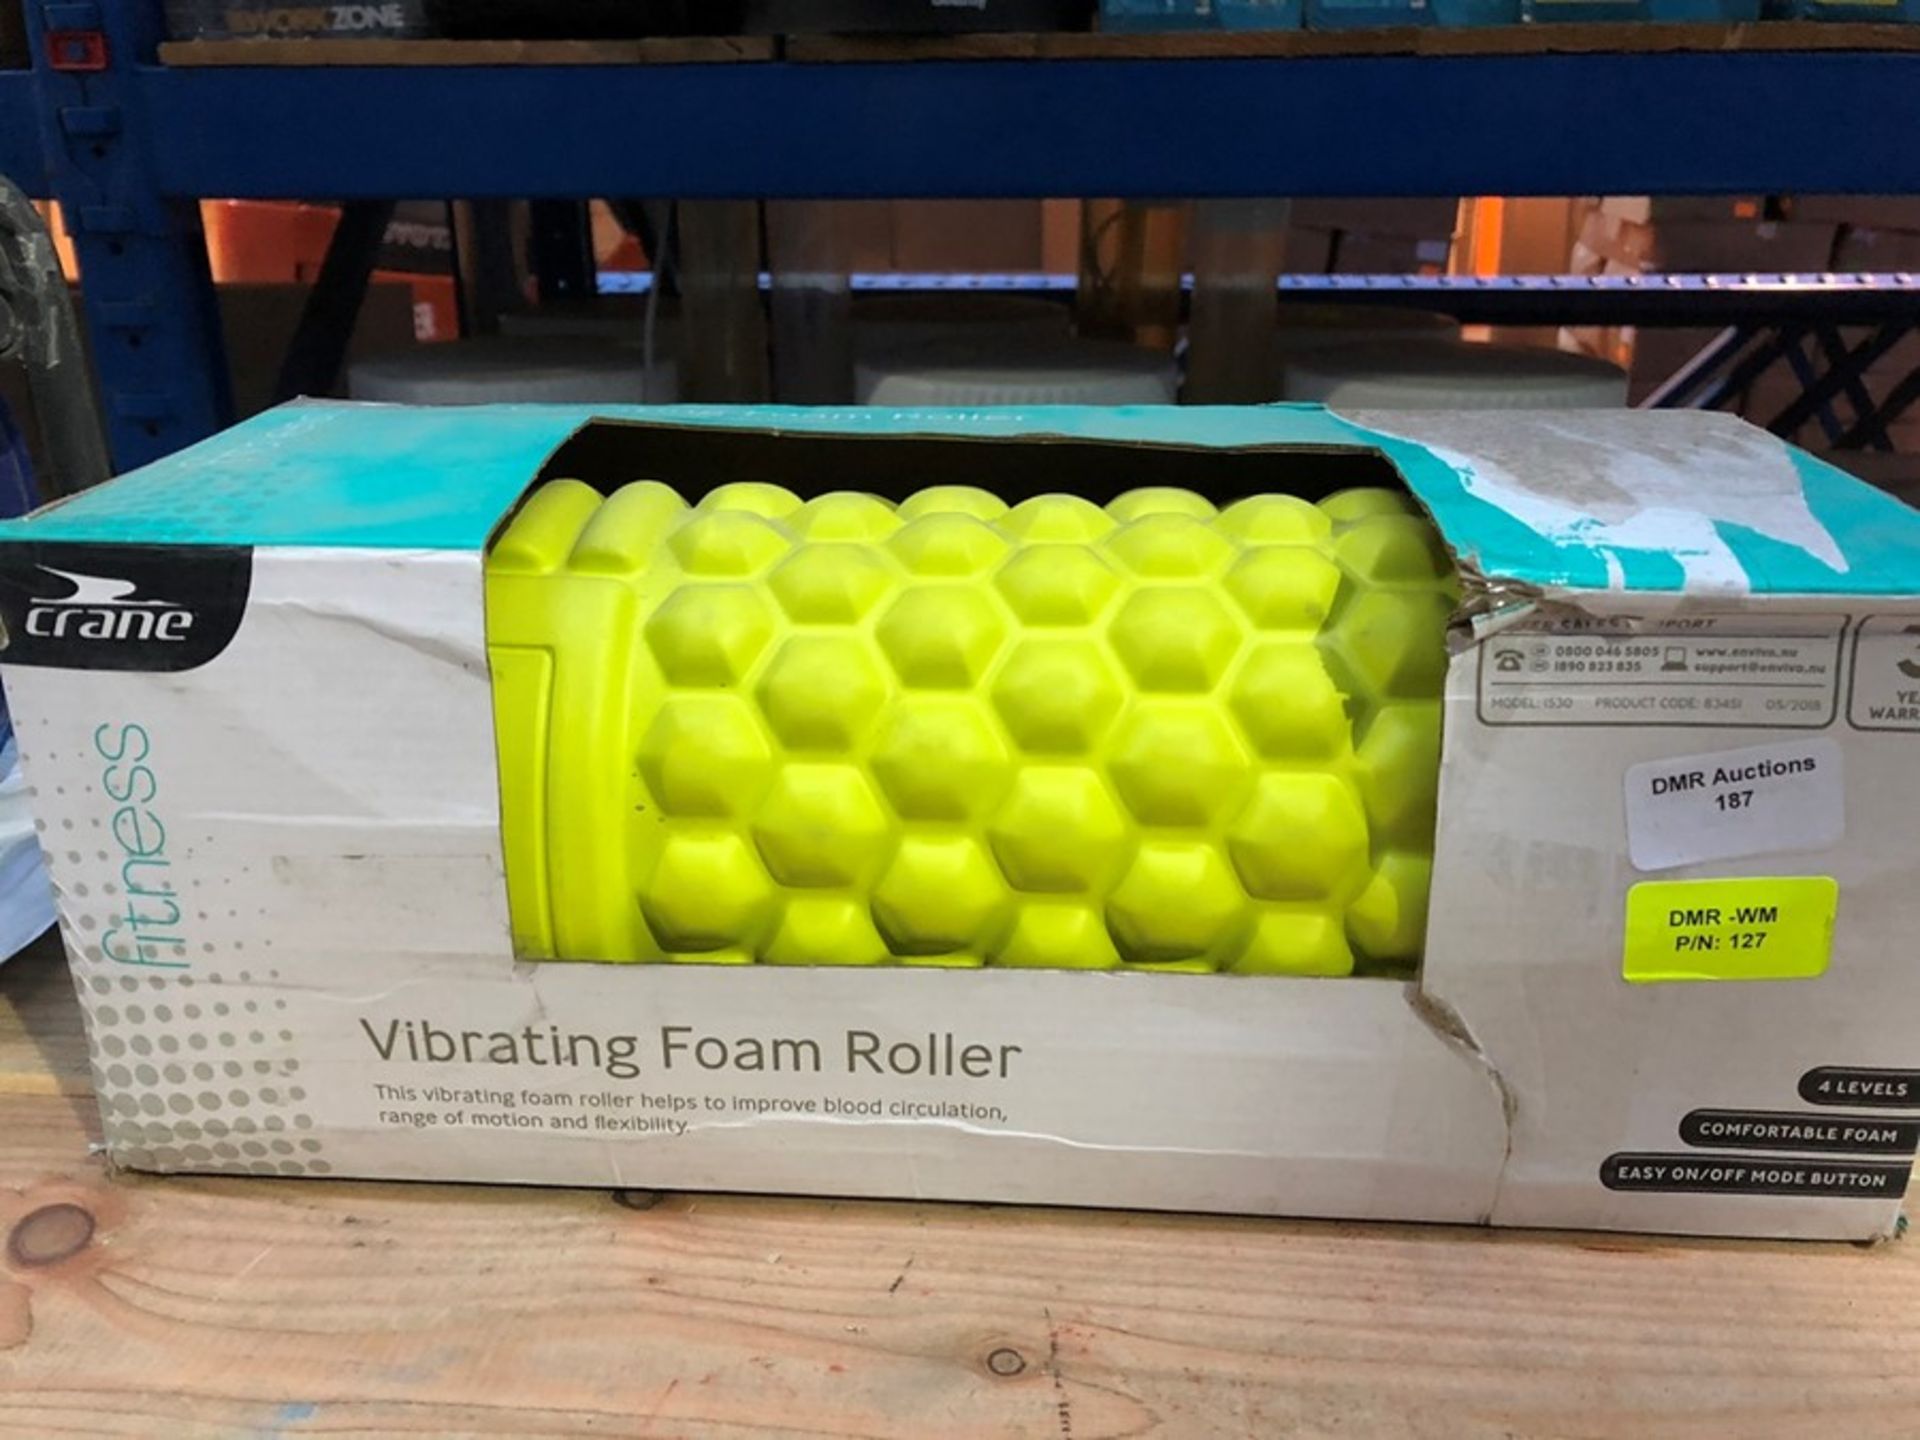 1 BOXED CRANE VIBRATING FOAM ROLLER / RRP £24.99 (PUBLIC VIEWING AVAILABLE)